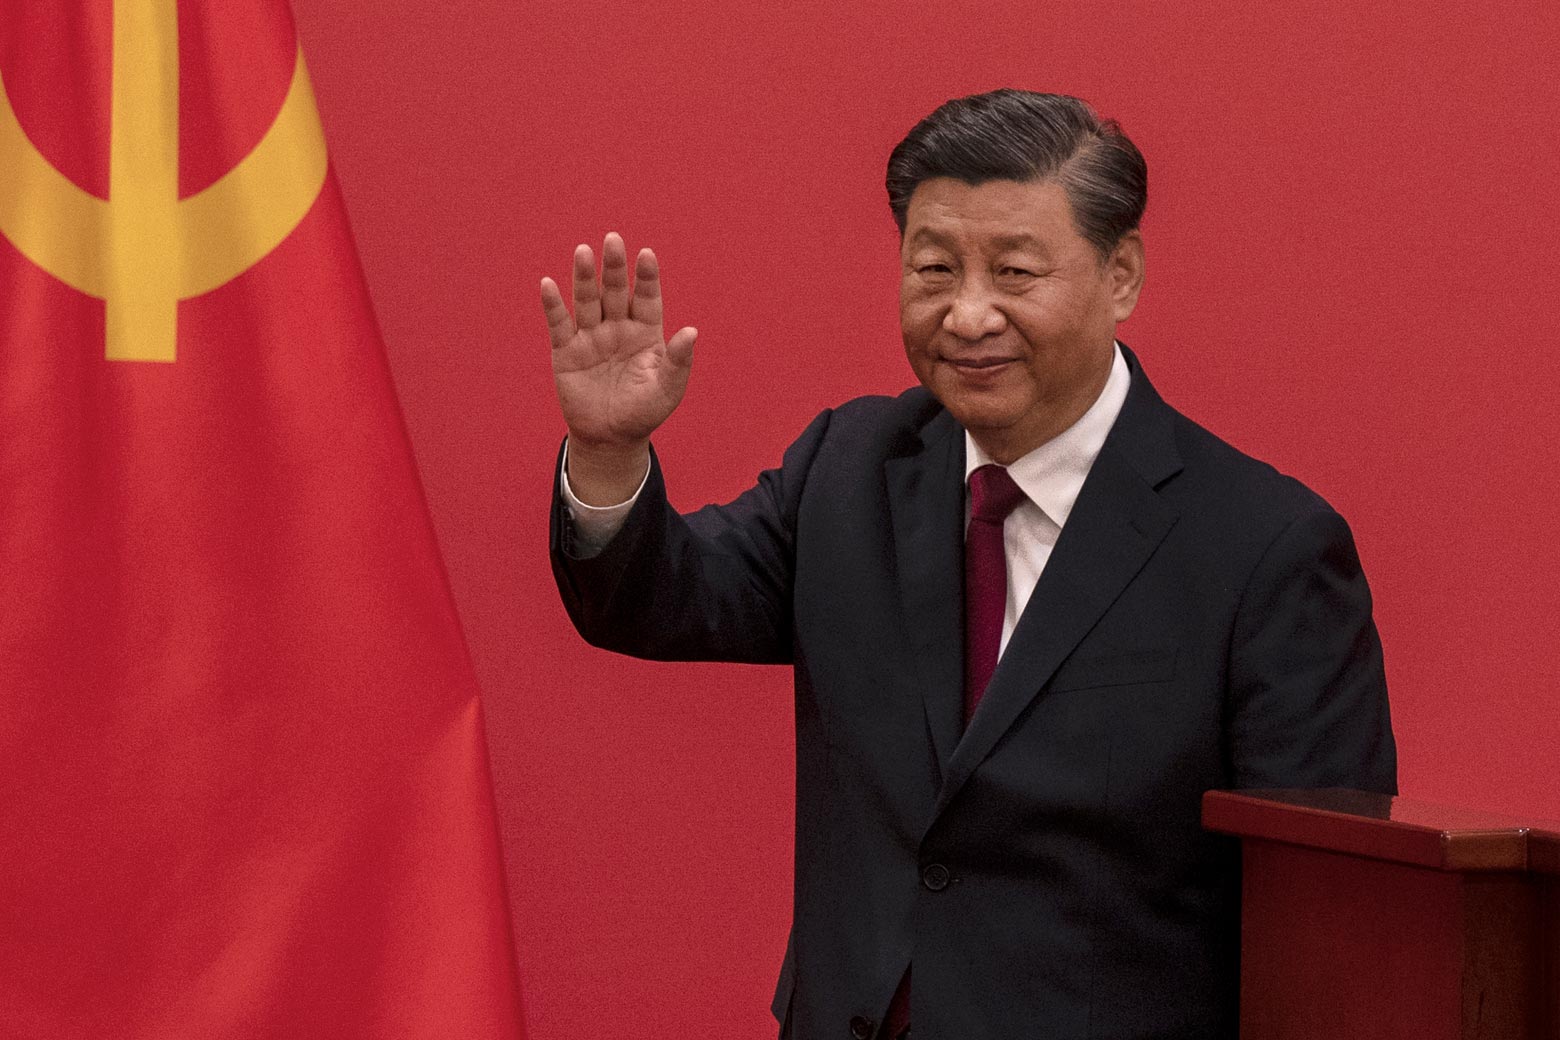 Chinese President Xi Jinping waves from in front of the red background of the Chinese flag.